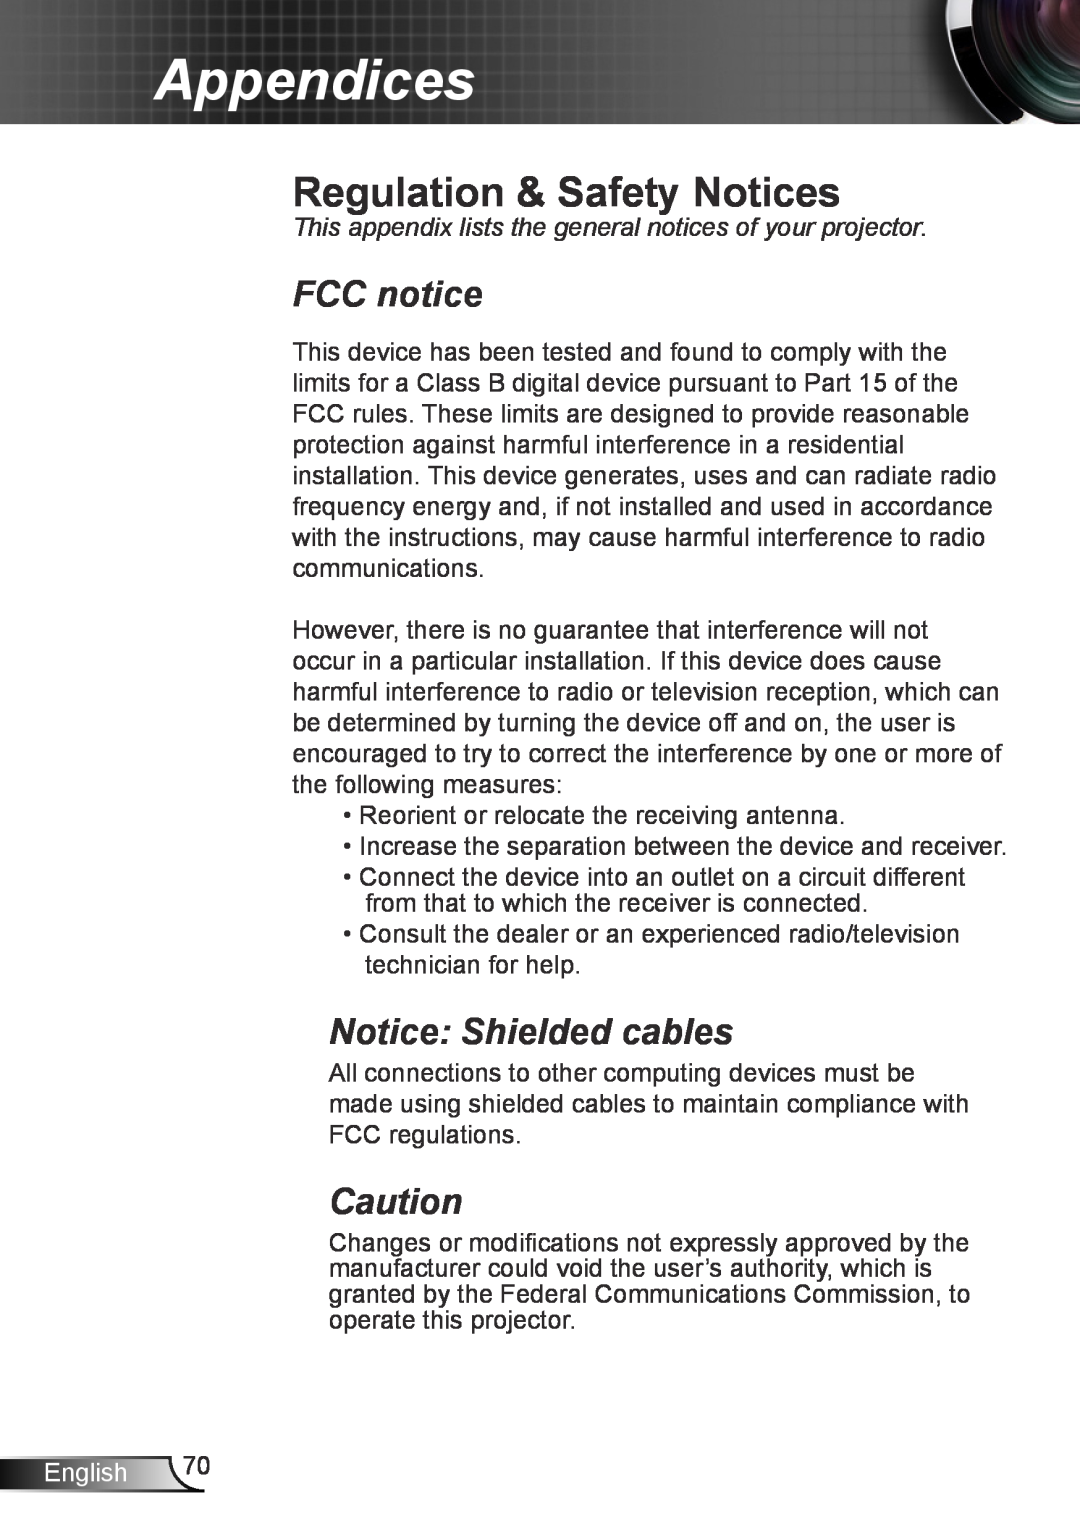 Optoma Technology TW695UT3D manual Regulation & Safety Notices, FCC notice, Notice Shielded cables, Appendices, English 